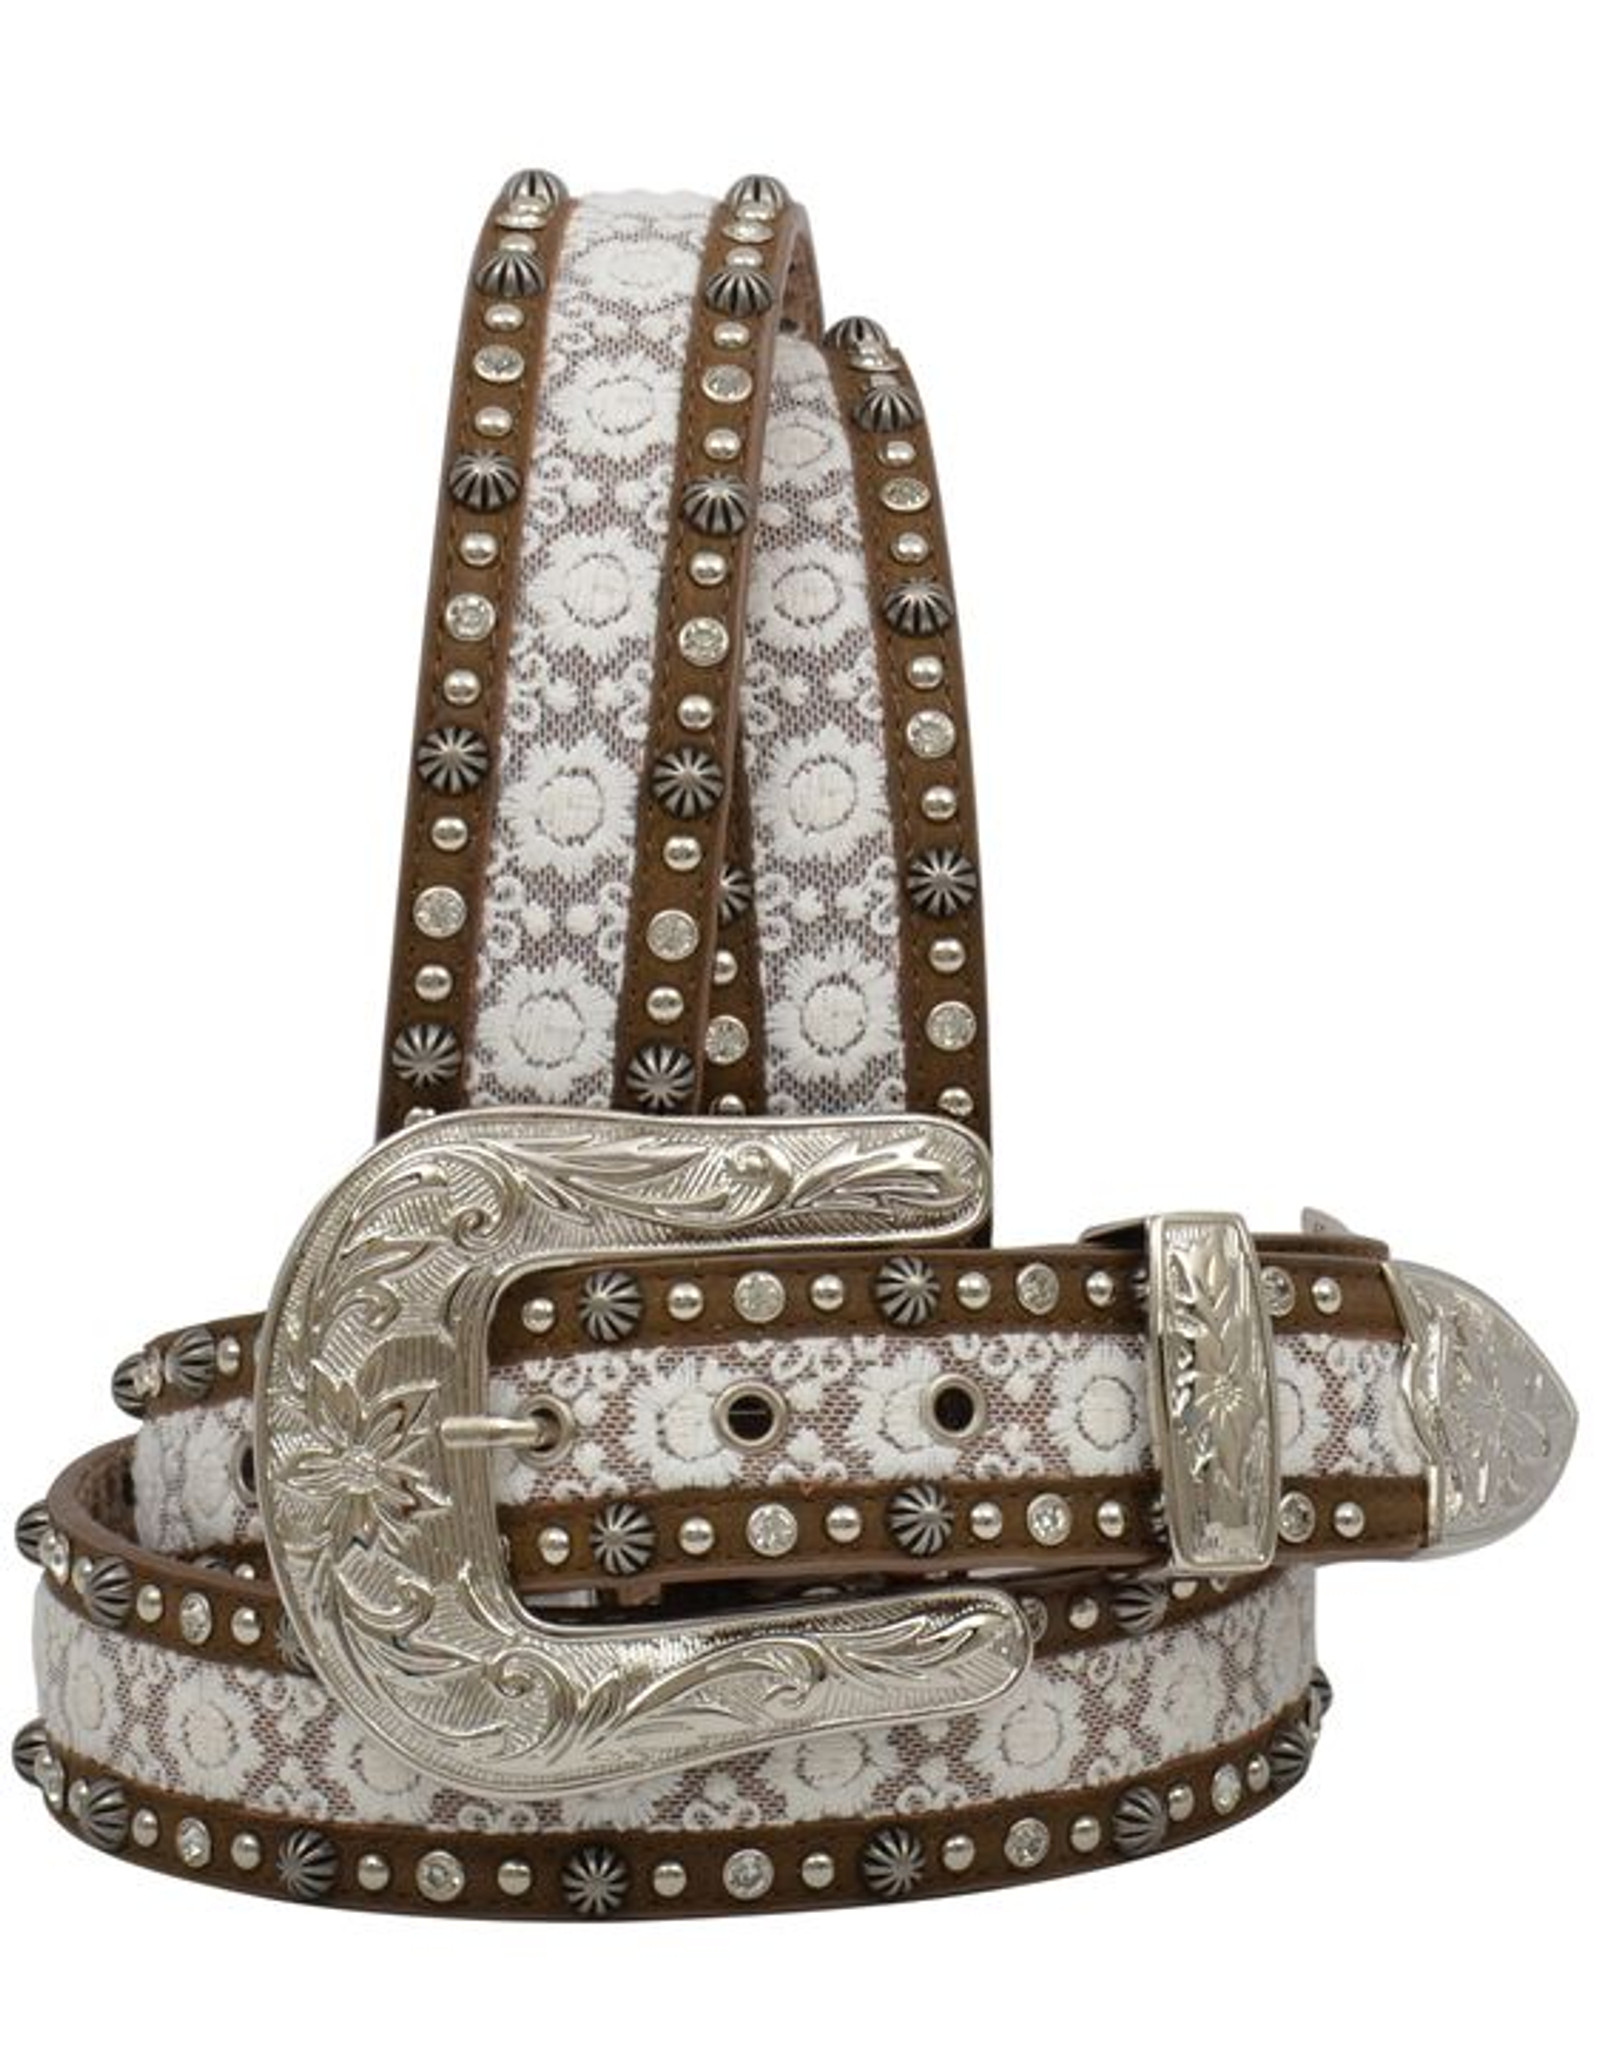 Angel Ranch Women's 1 1/2" Lace Belt - Distressed Brown